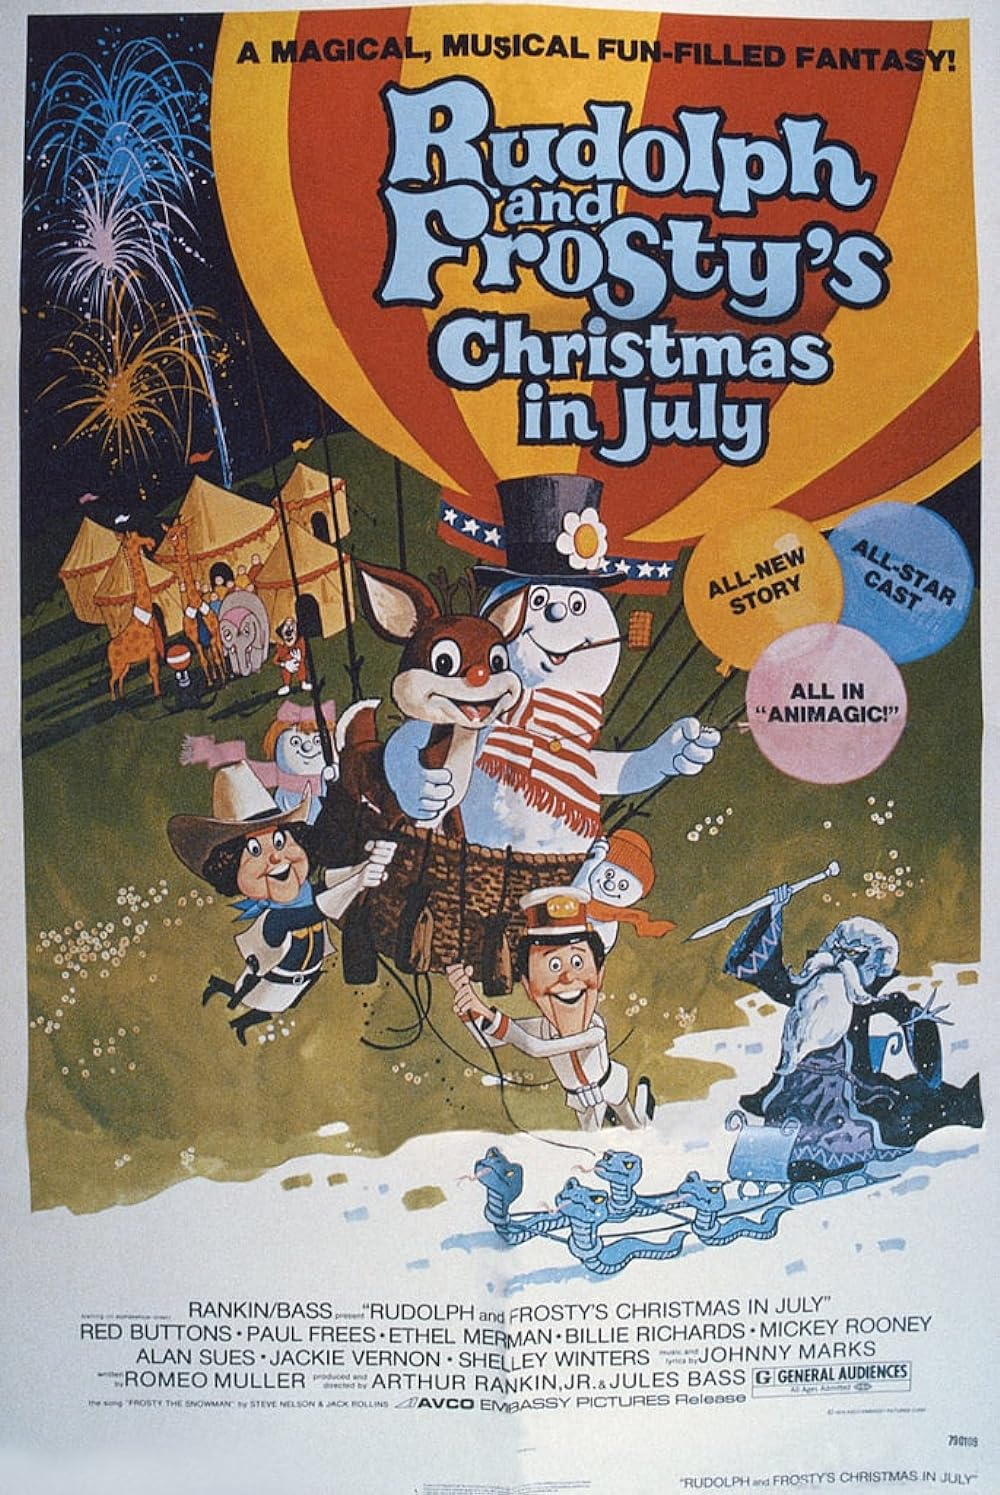 Best Christmas animated movies - Rudolph and Frosty's Christmas In July